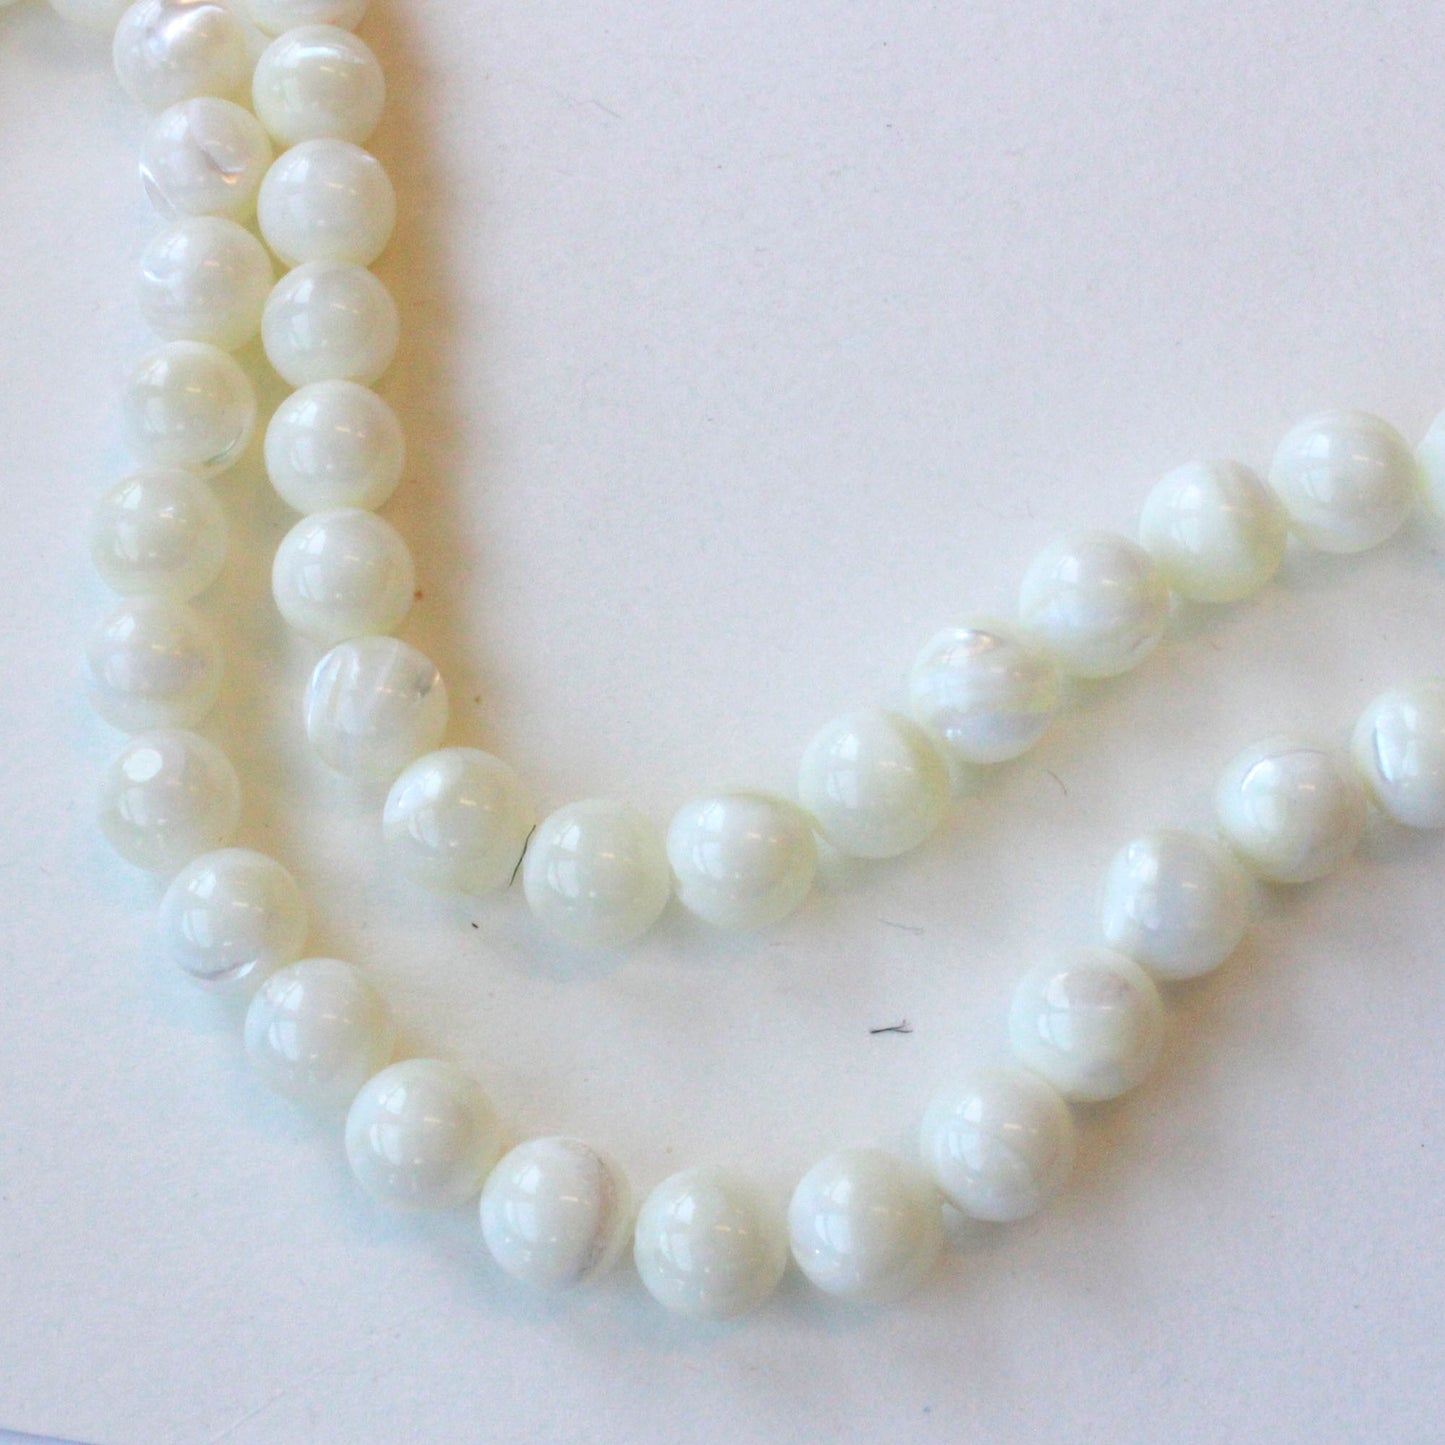 10mm Round Mother of Pearl - 16 inches